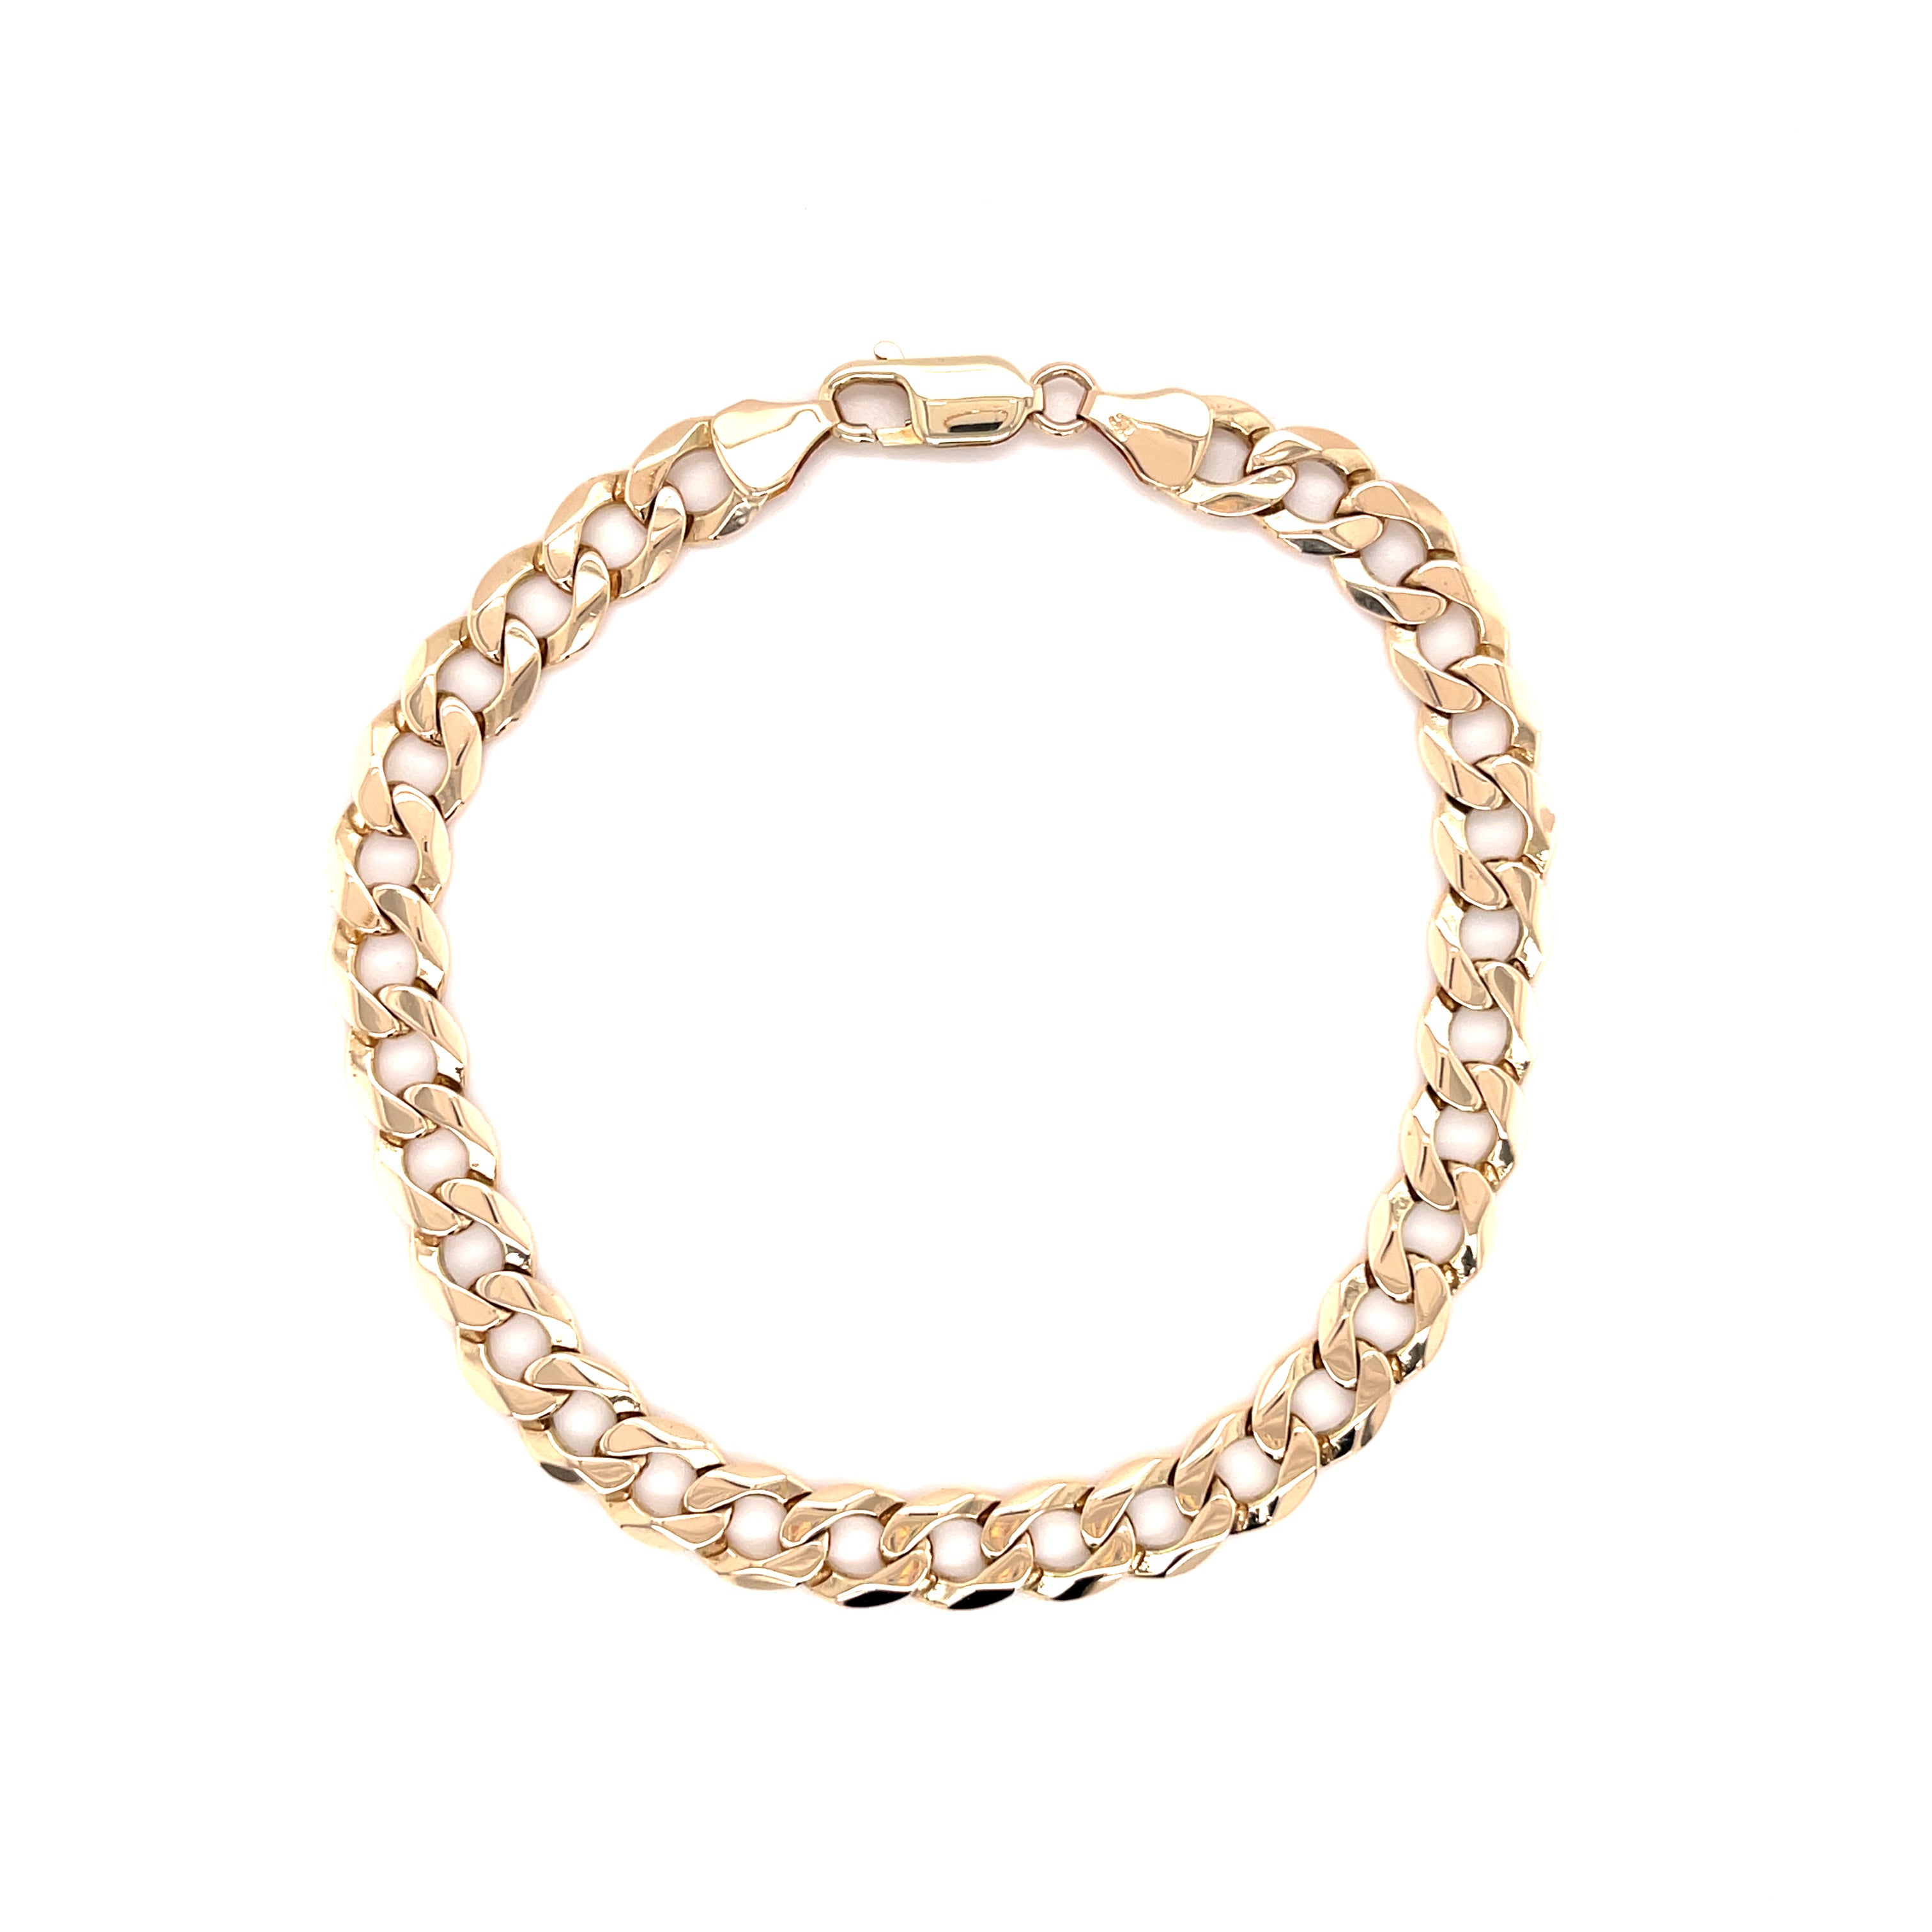 9ct Yellow Gold 8.5 Inch Curb Link Bracelet - 14.38g